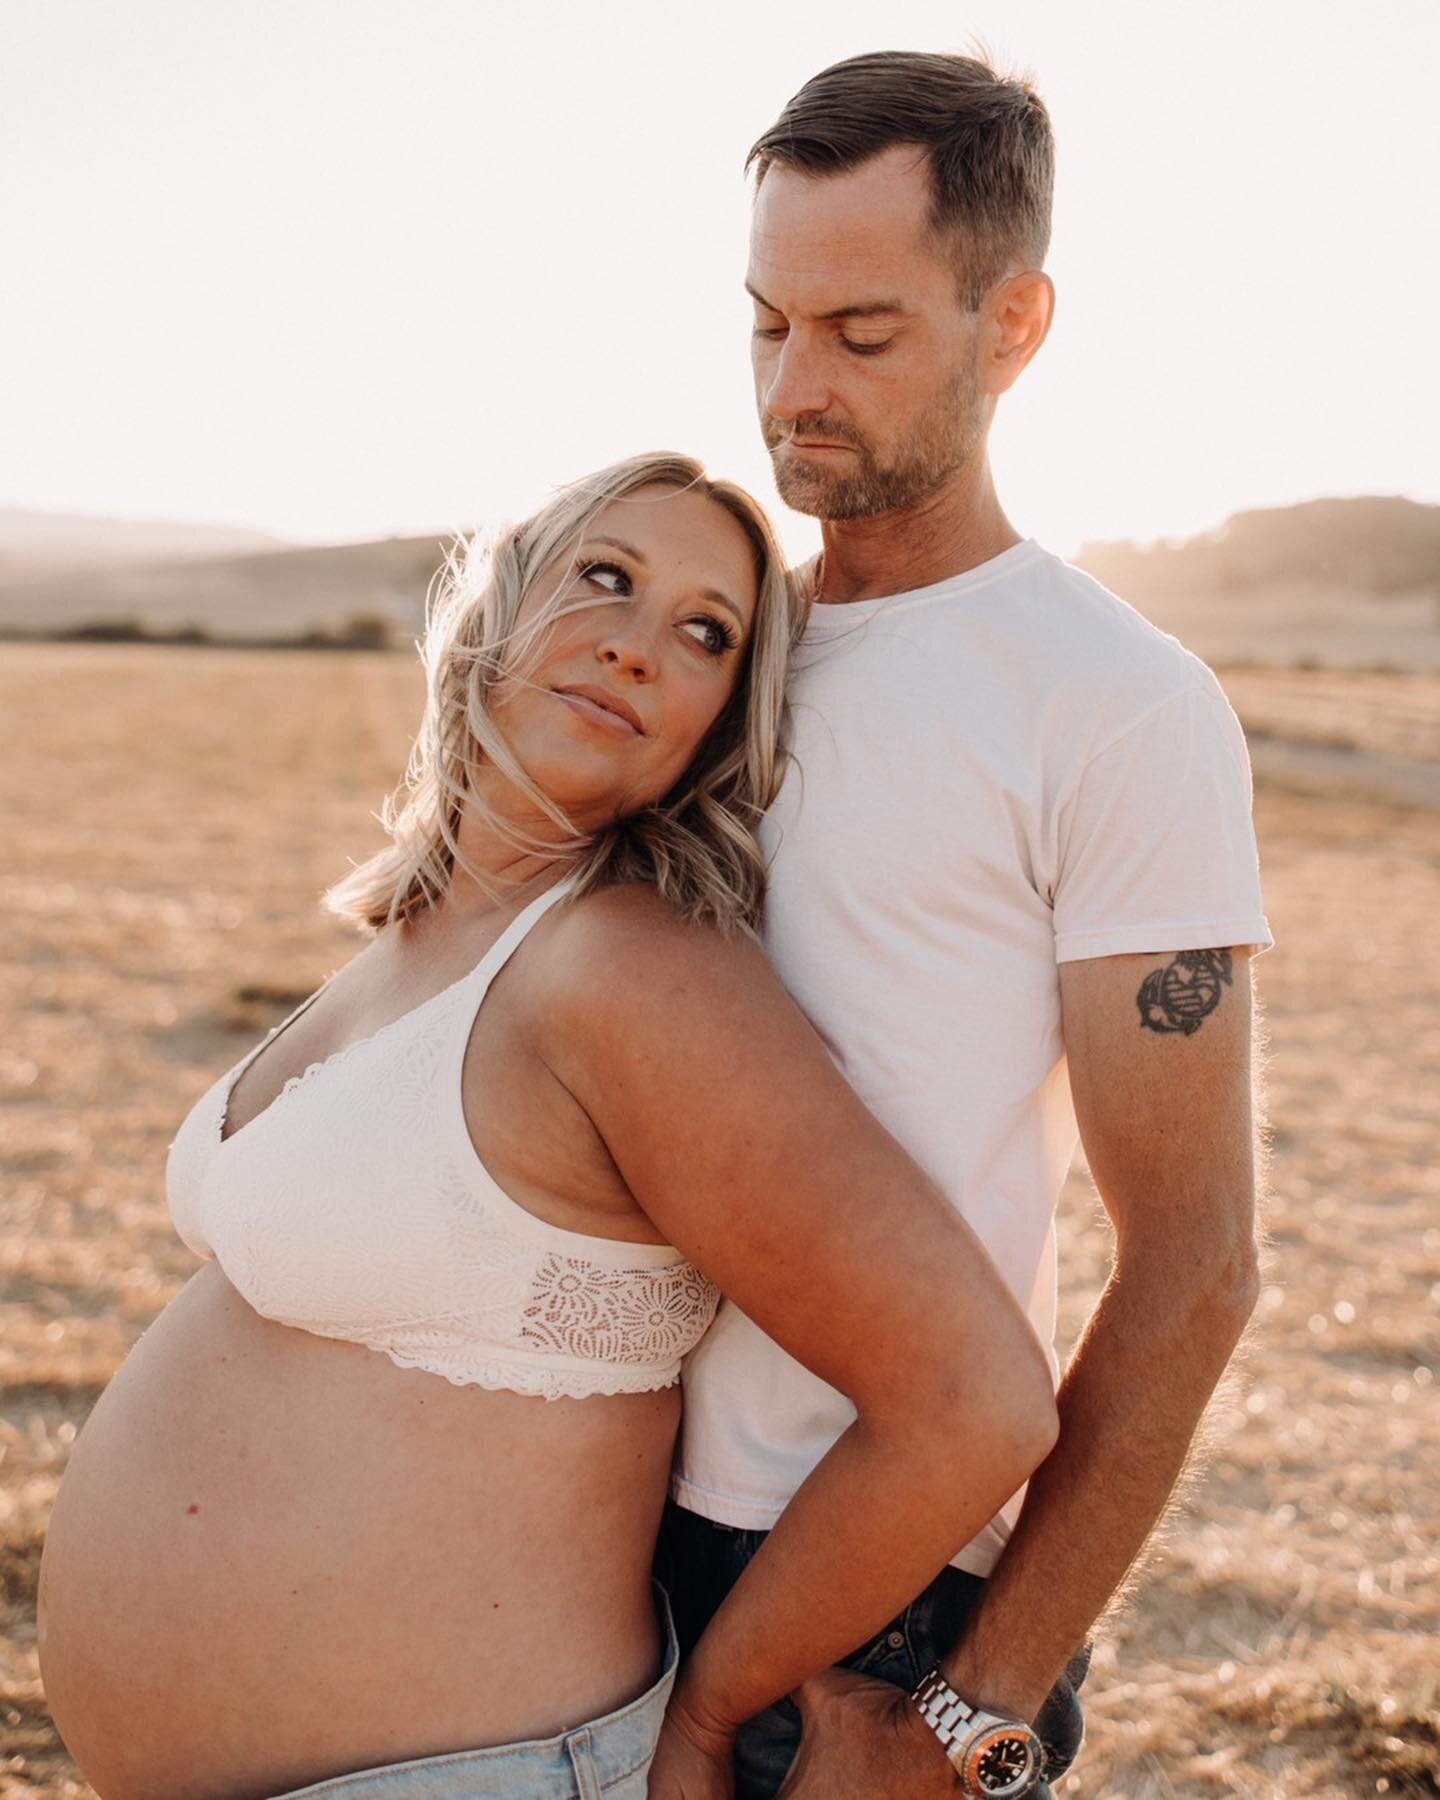 This has been the summer of bellies and I cannot complain. It&rsquo;s been amazing to watch expectant parents talk about the joy and excitement they are feeling in the anticipation of their little one&hellip; aware, but somehow also unaware of the ts